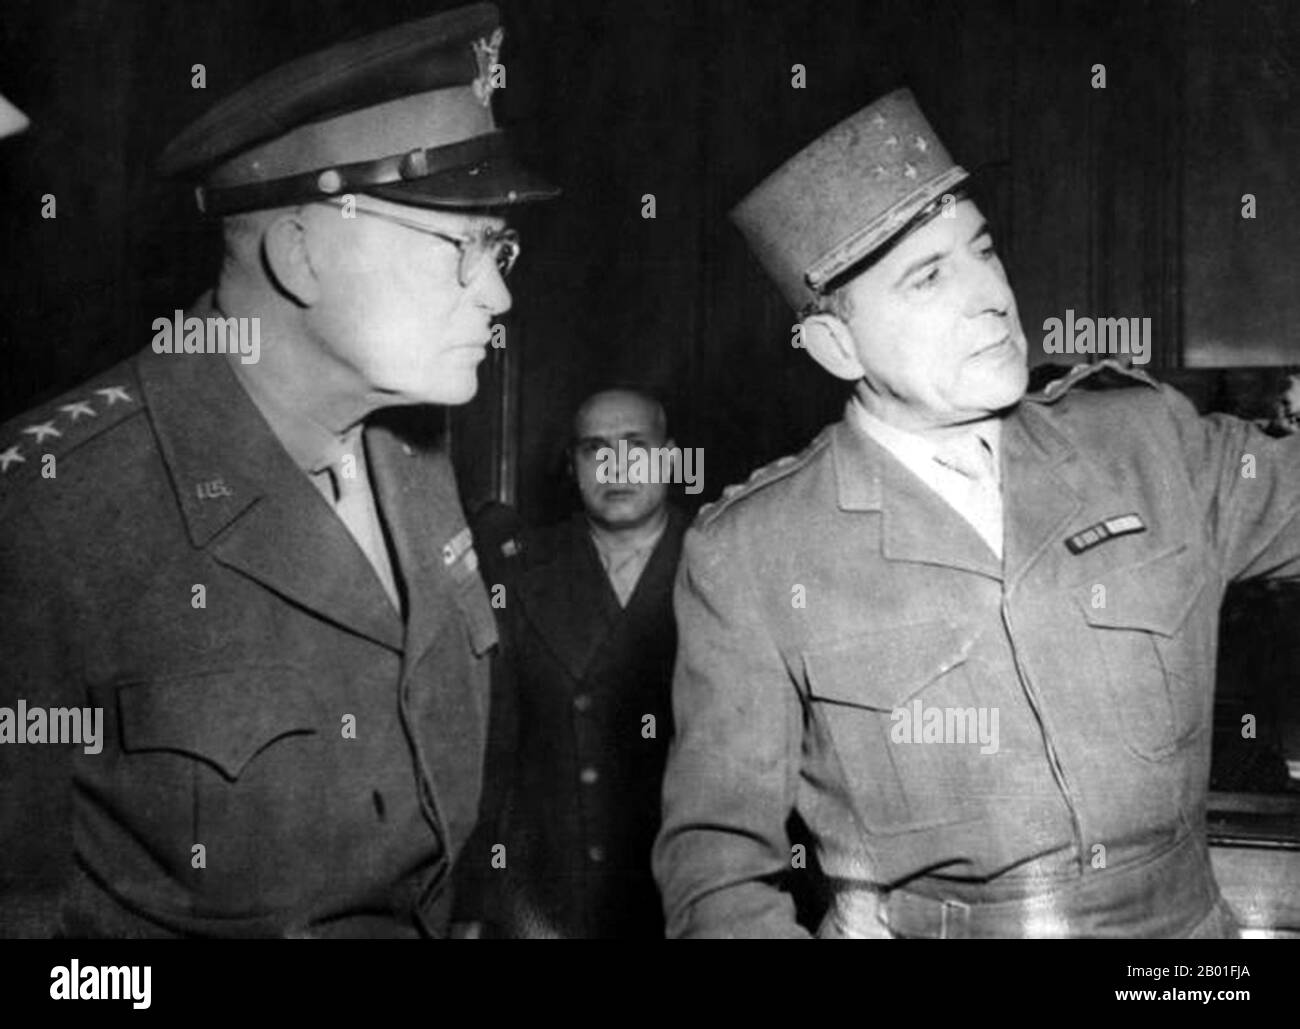 France/Vietnam: General Jean de Lattre de Tassigny with General  Dwight D. Eisenhower at the end of World War II, 1944.  General Jean de Lattre de Tassigny was a French military hero and commander in the First Indochina War.  Having fought in the First World War and Rif War (Second Moroccan War), de Tassigny (nickname: 'Roi Jean') was a hero of the Free French in World War II. Later, he commanded French troops in Indochina during the First Indochina War. He won three major victories at Vinh Yen, Mao Khe and Yen Cu Ha and successfully defended the north of the country against the Viet Minh. Stock Photo